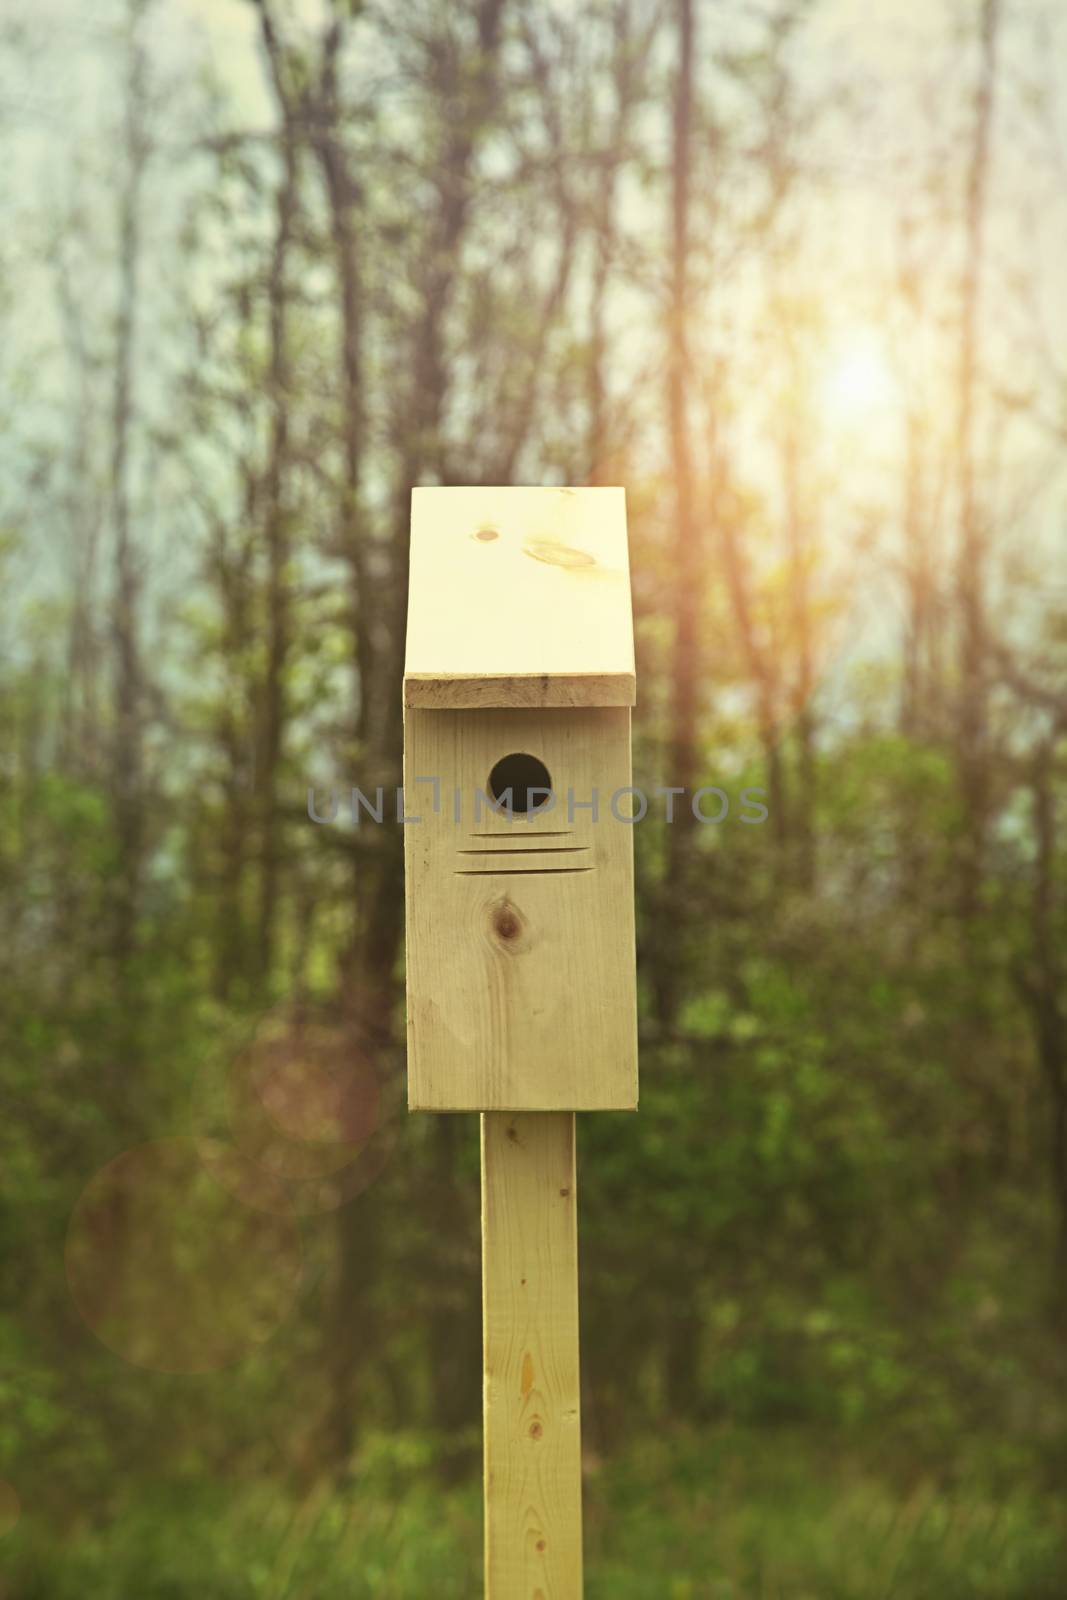 New nesting box set out for Spring by Sandralise